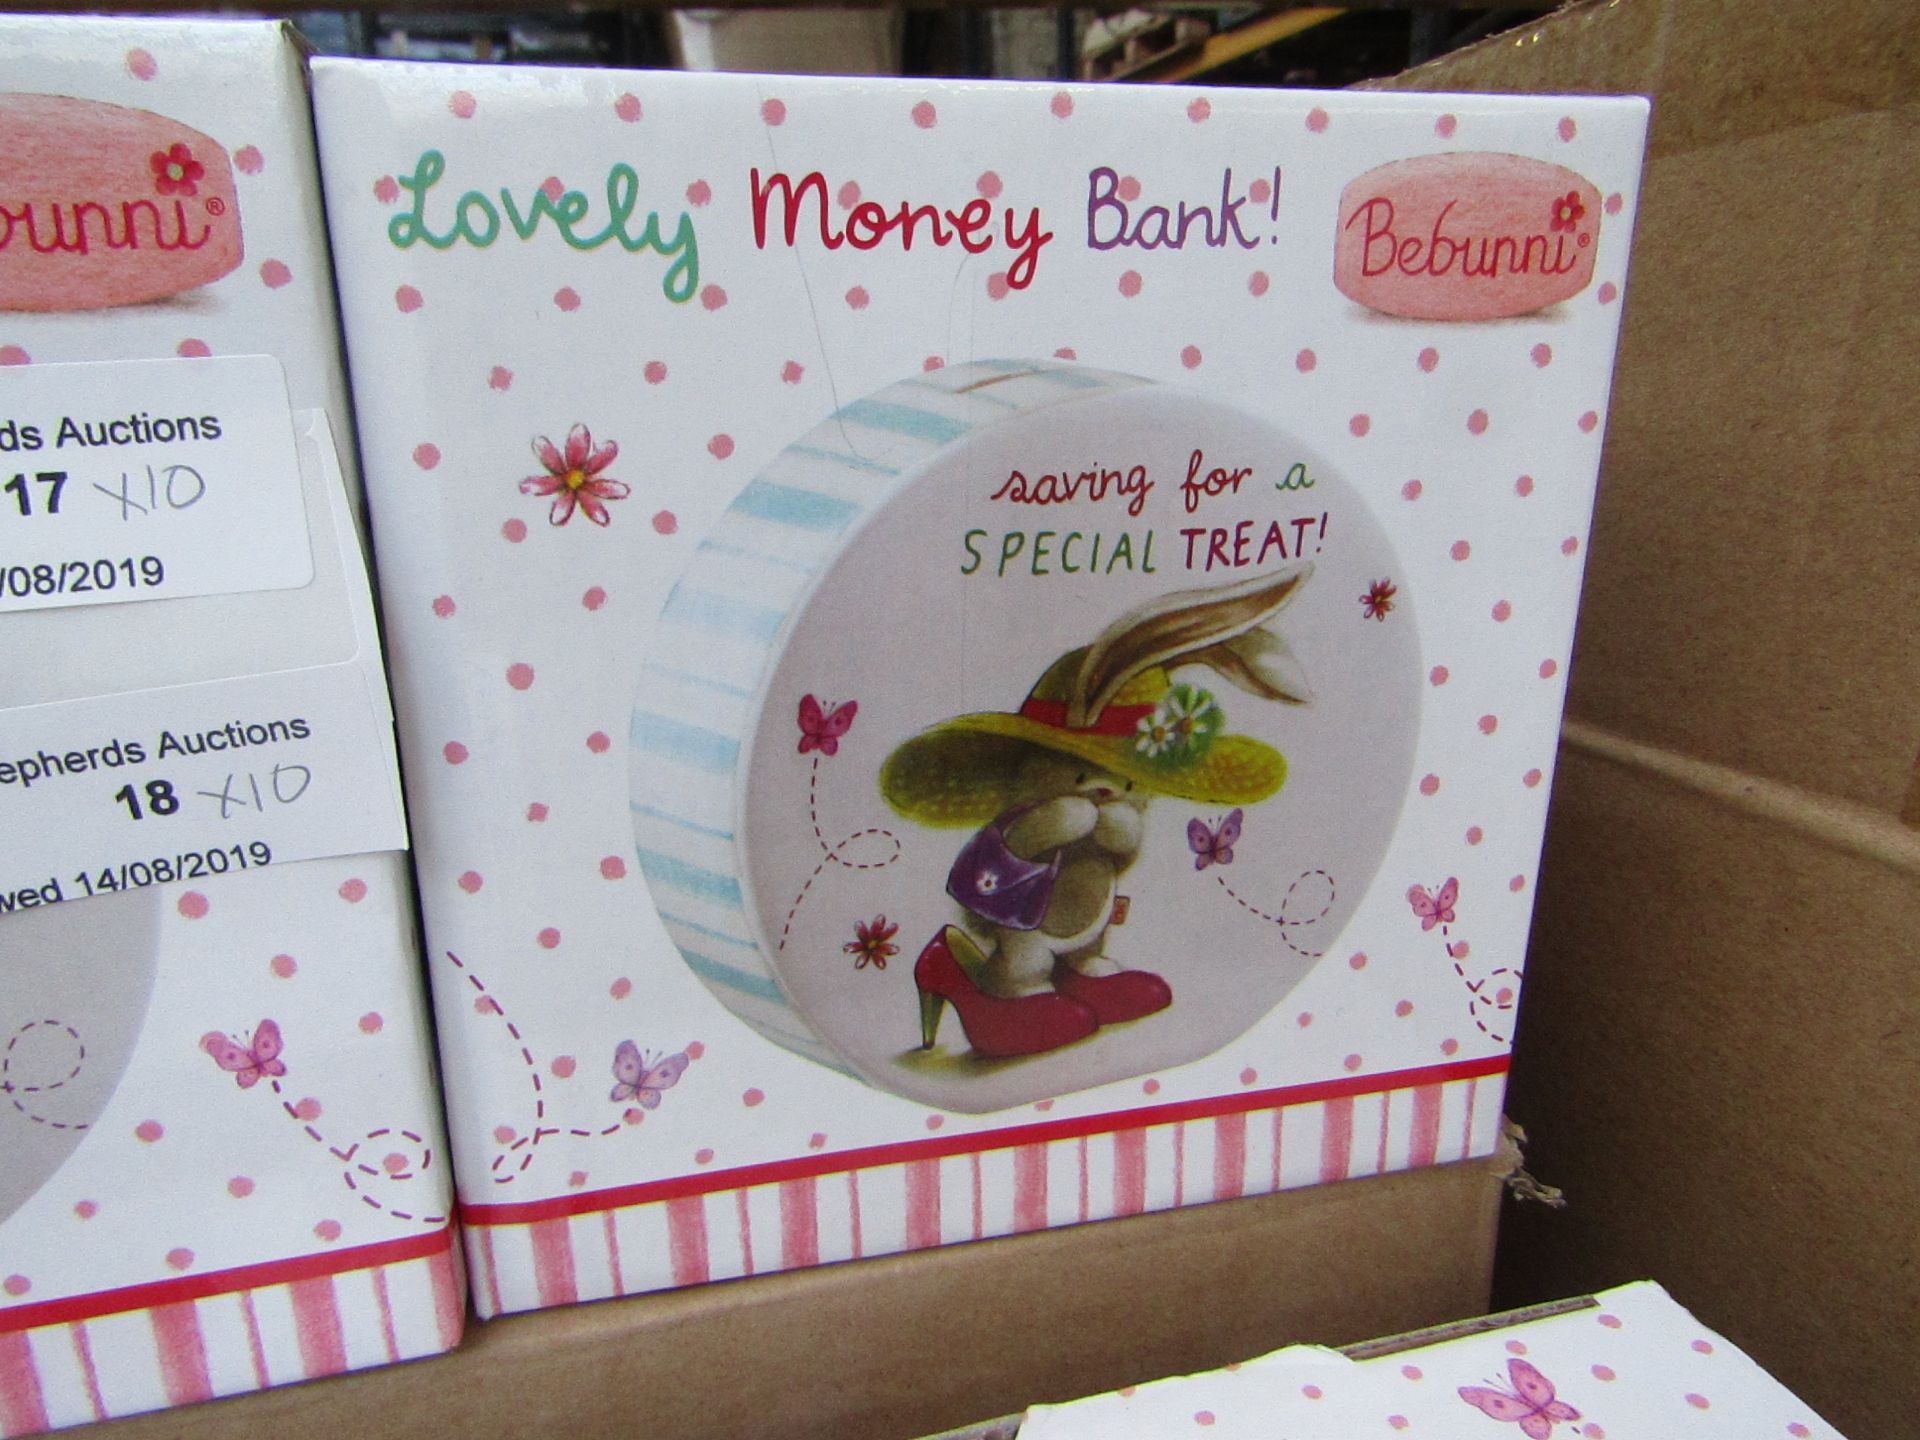 10x Bebunni money bank, all new and boxed.